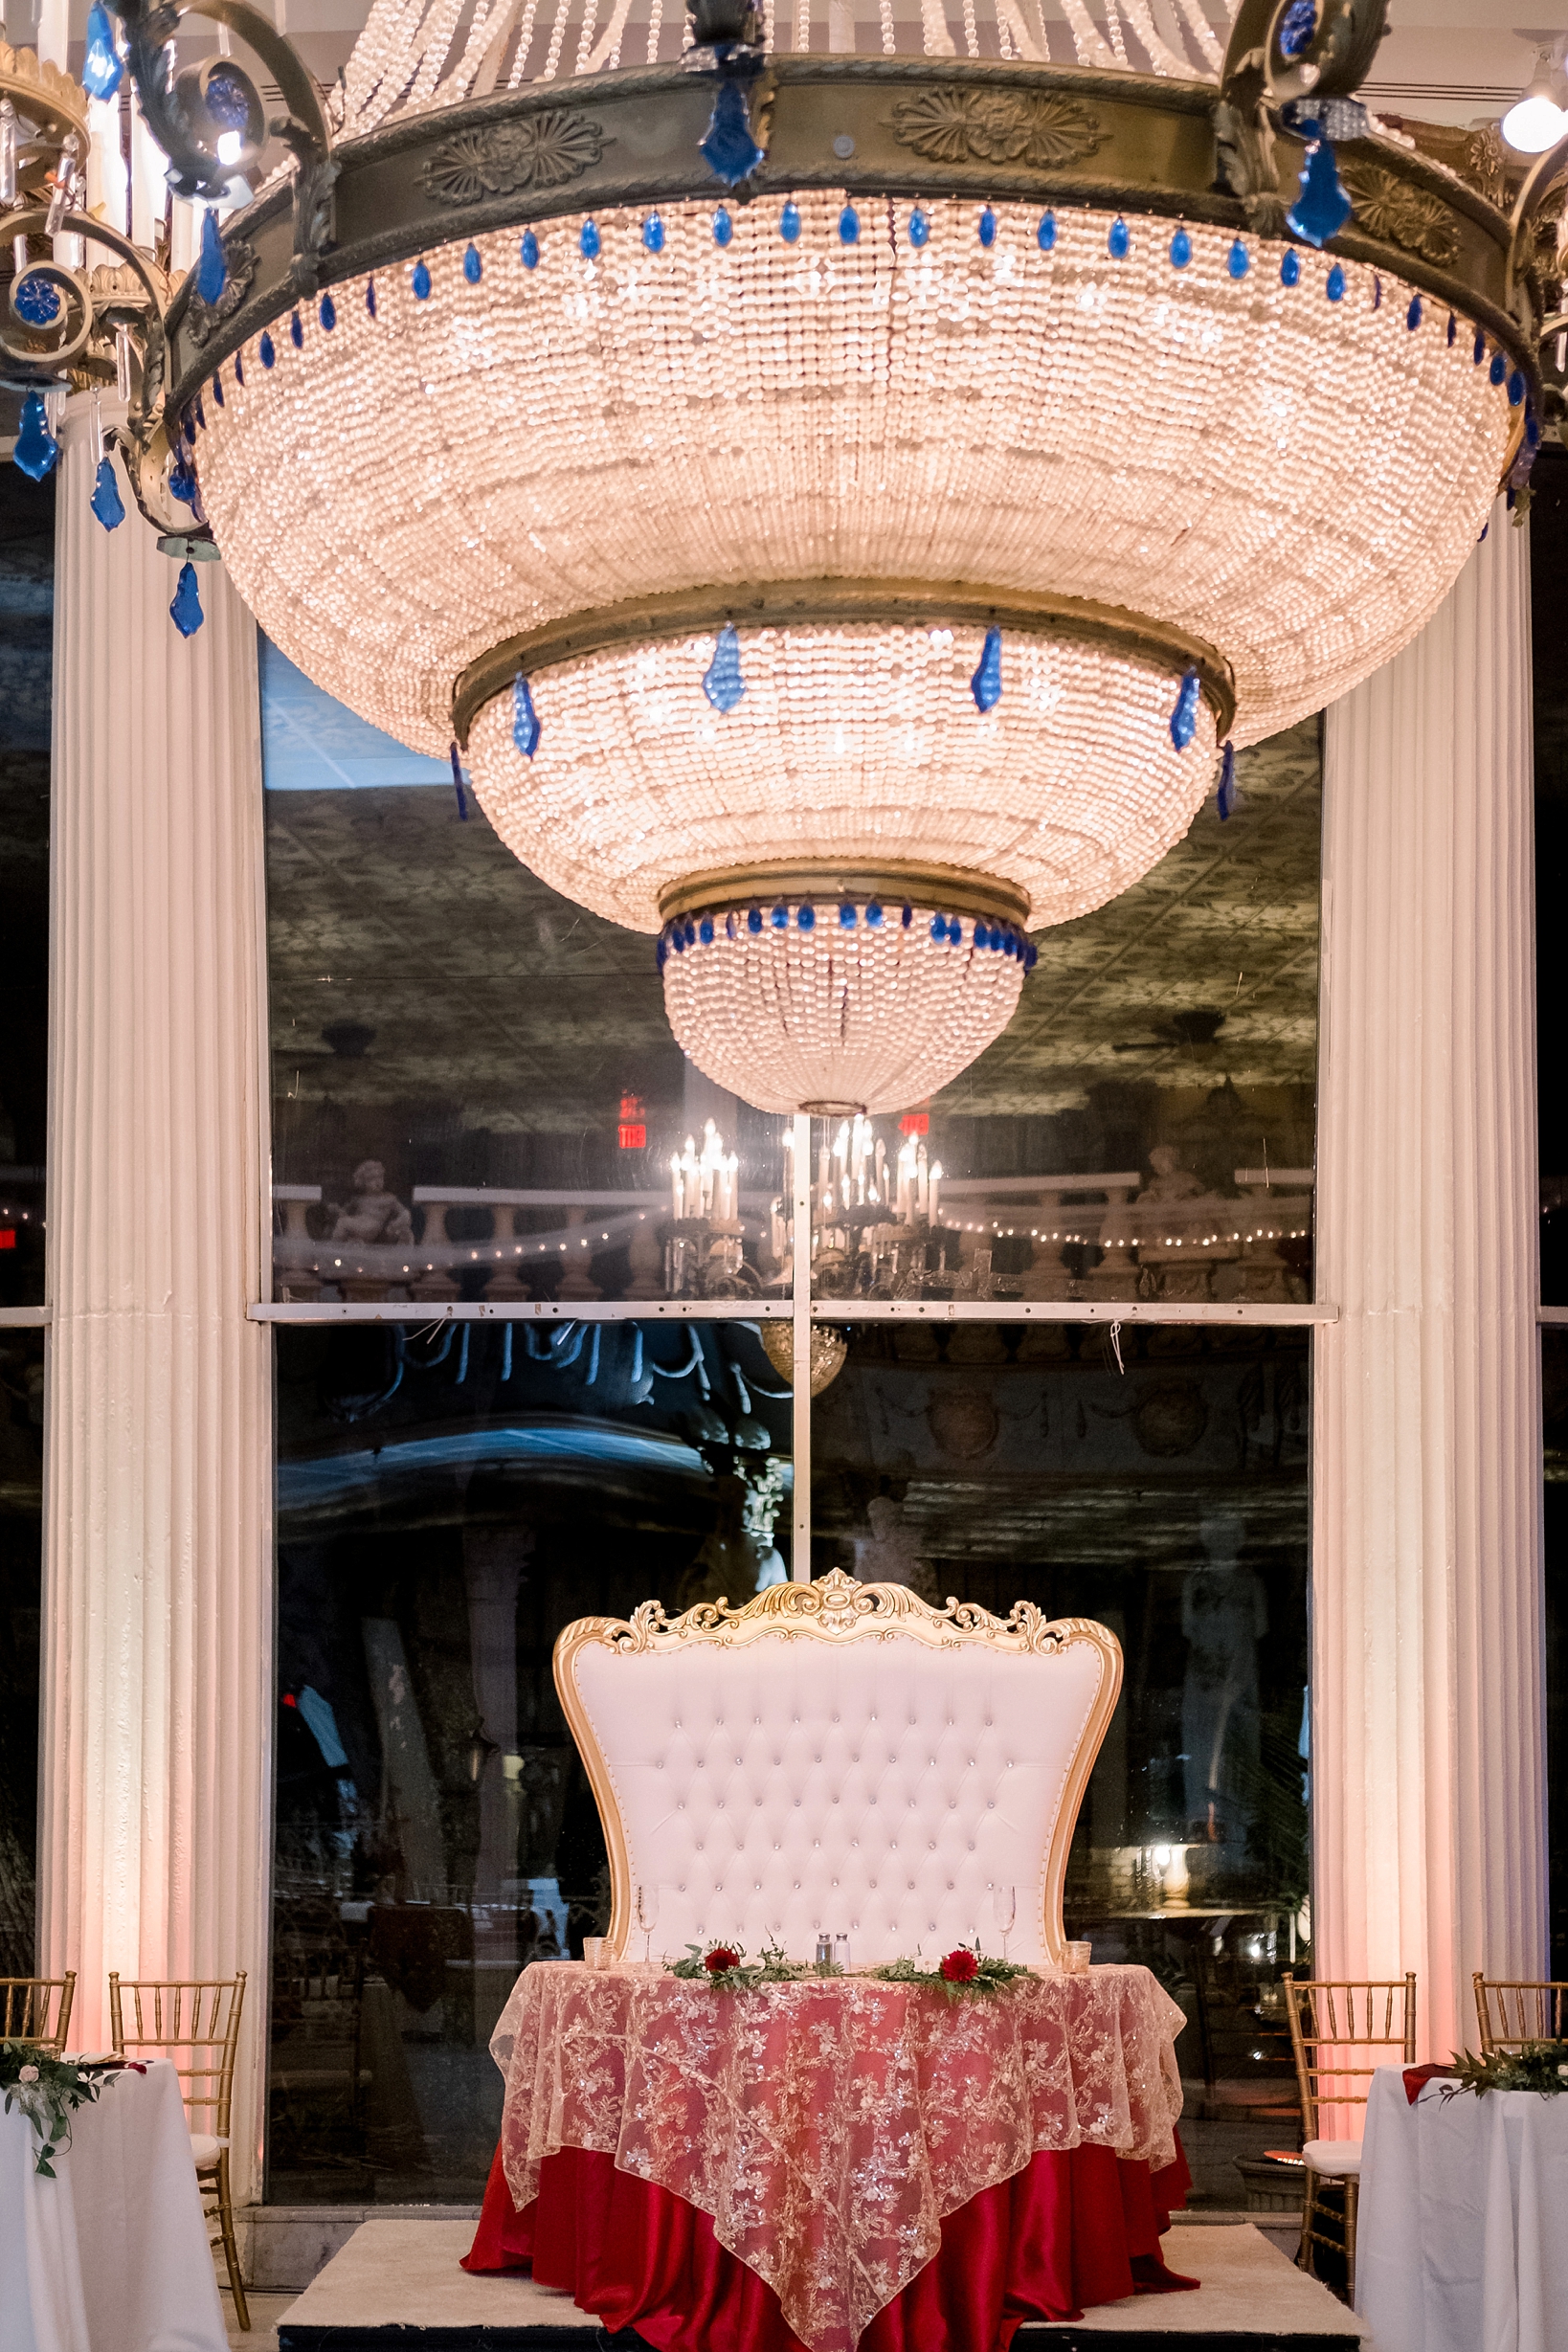 The bride and grooms sweetheart table under the giant chandelier in the ballroom of the Kapok Tree in Clearwater, FL by Sarah & Ben Photography